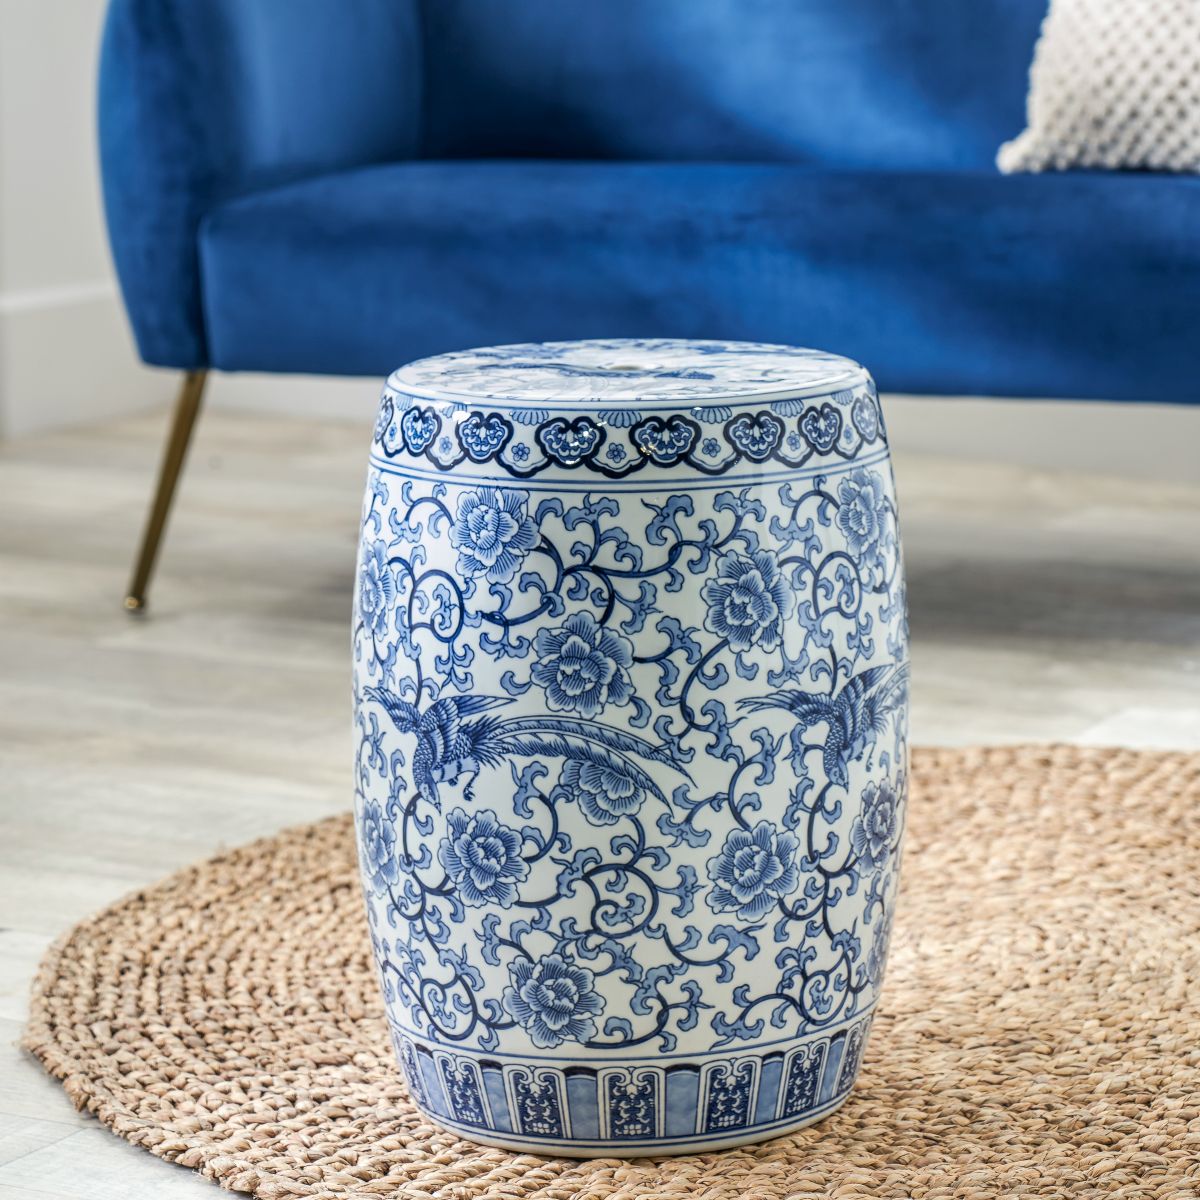 Matilde Blue and White Floral Ceramic Stool